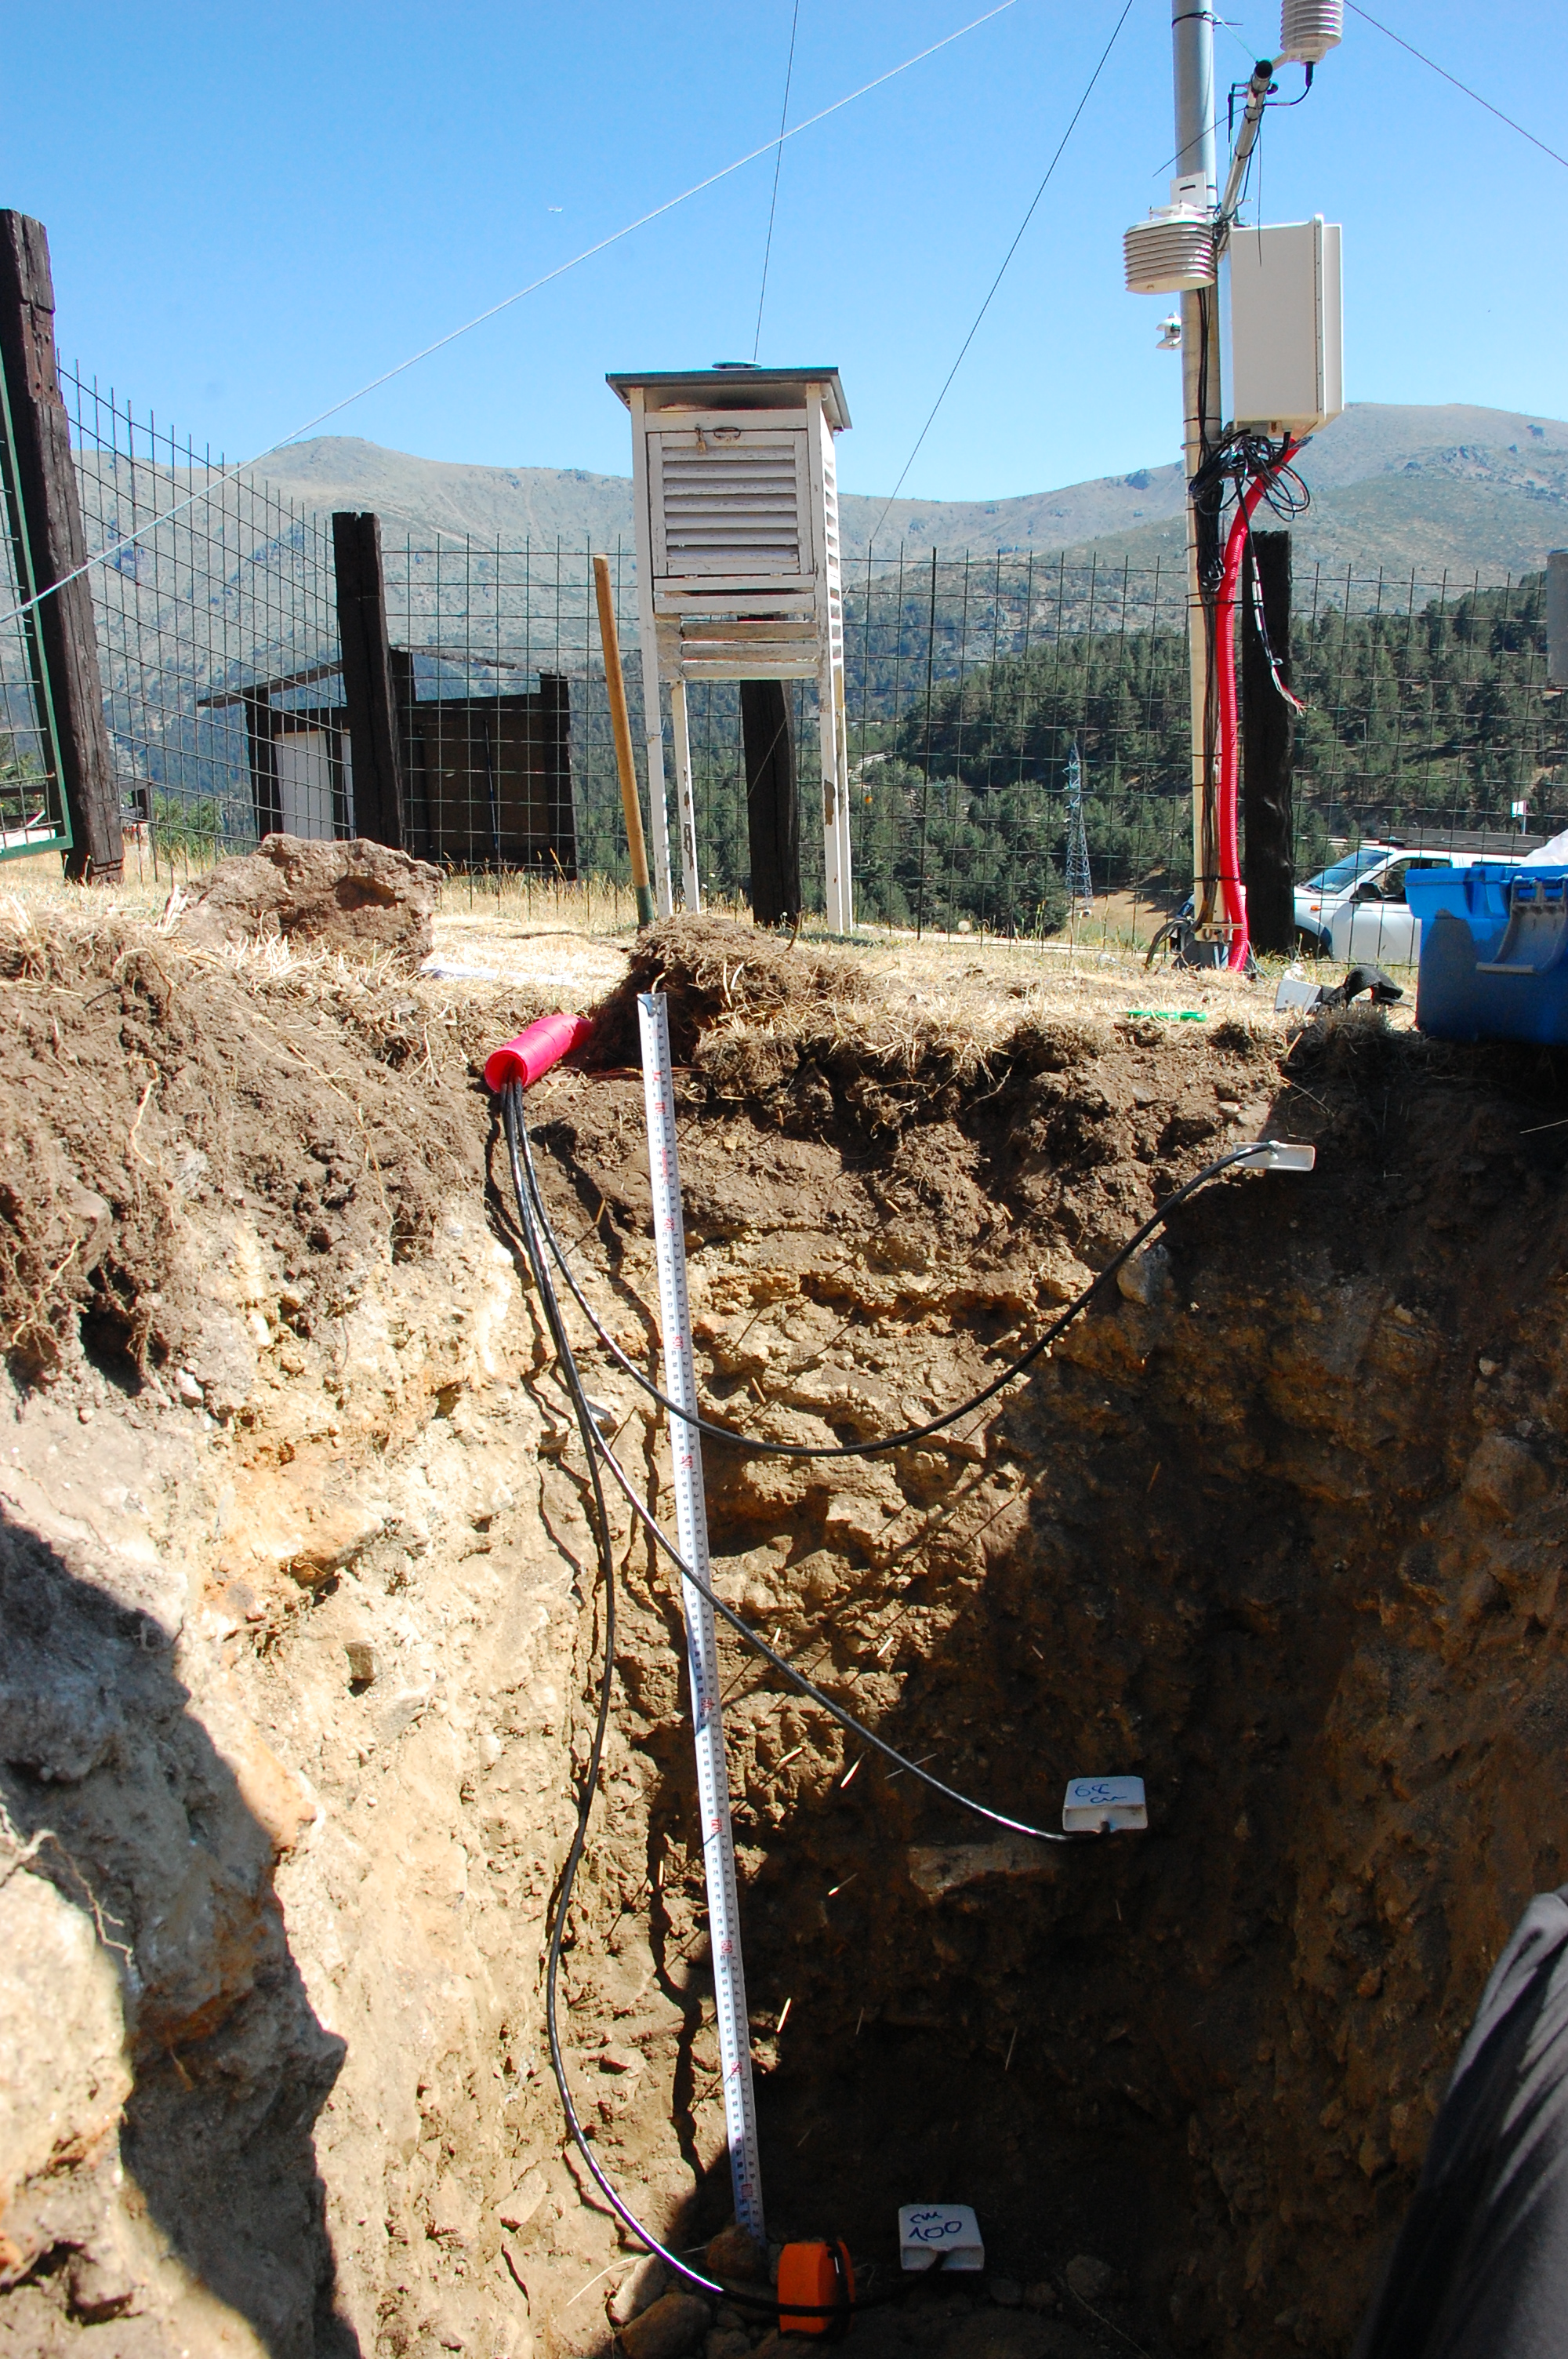 Trench with soil temperature and humidity sensors during taking of samples at EG004-Cotos (1.873 m a. s. l.) during the 2015 summer field work activities.